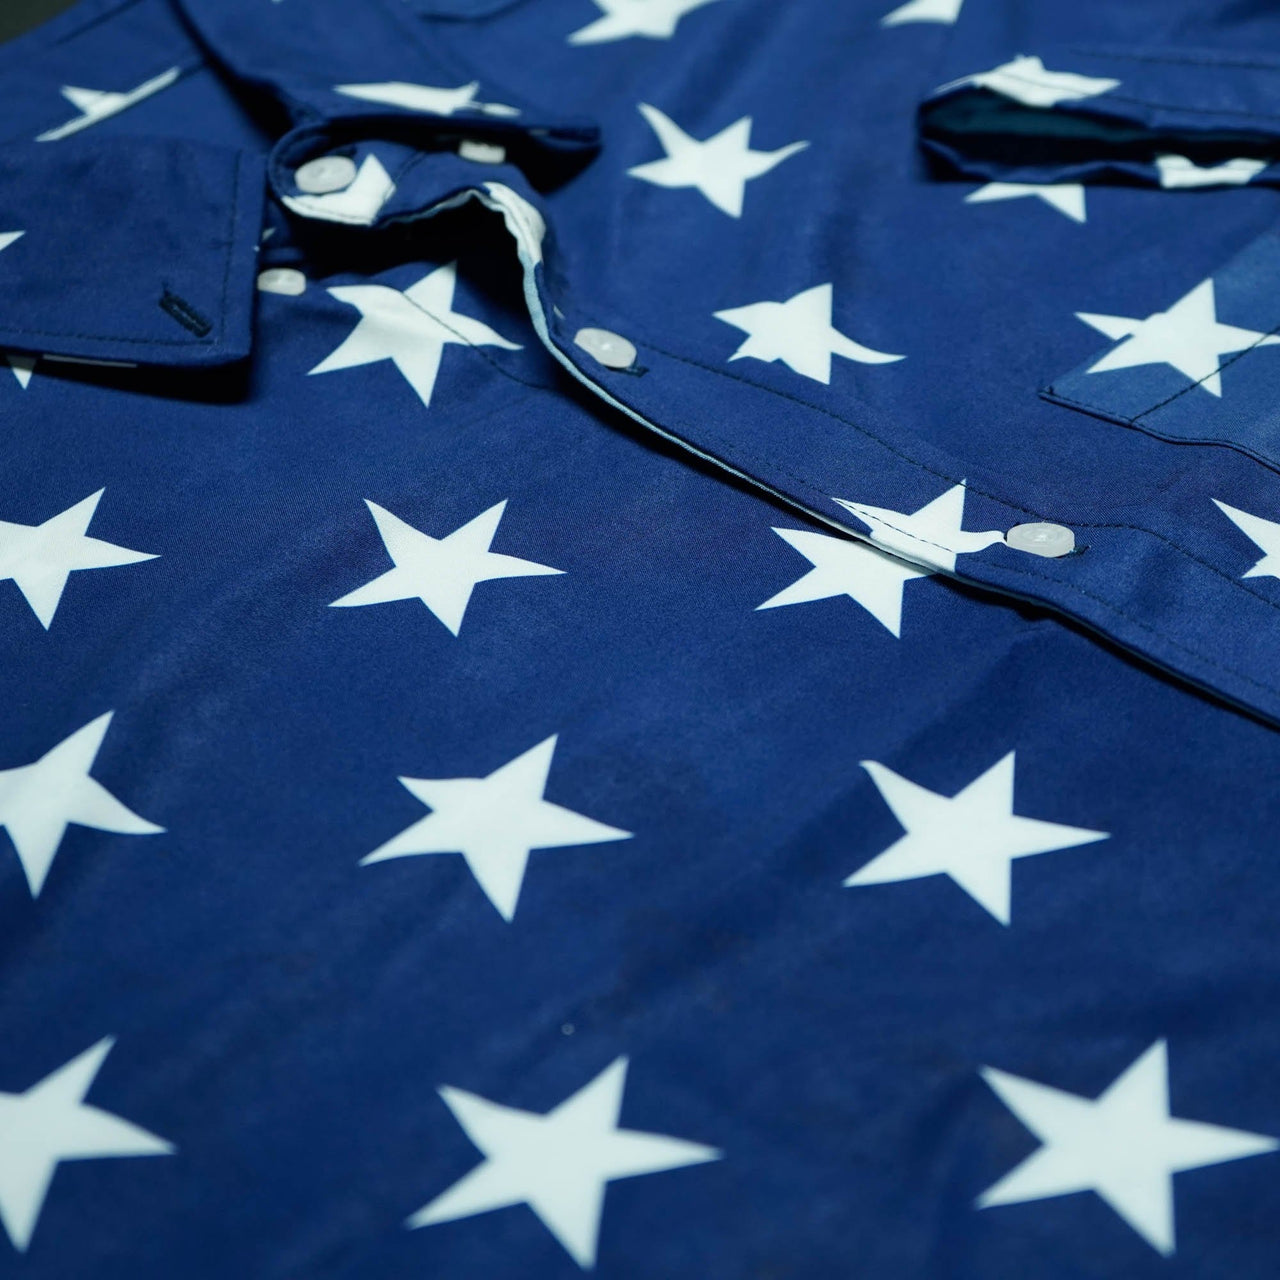 Star Spangled Button Down - Greater Half